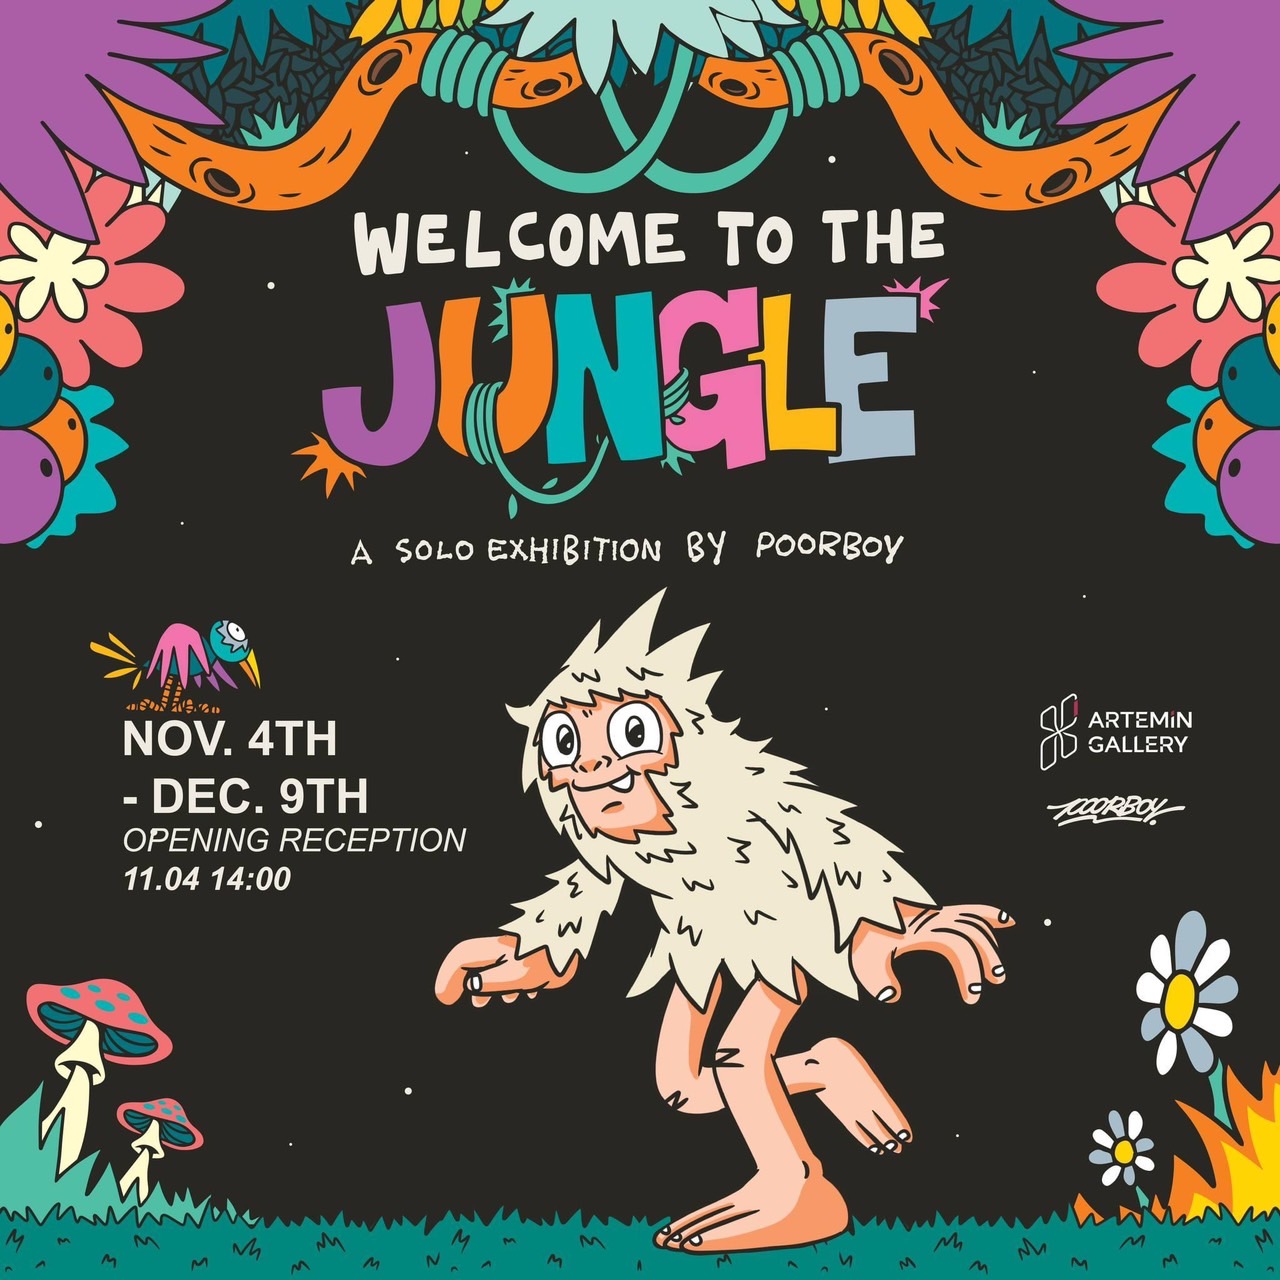 “Welcome to the JUNGLE” – POORBOY